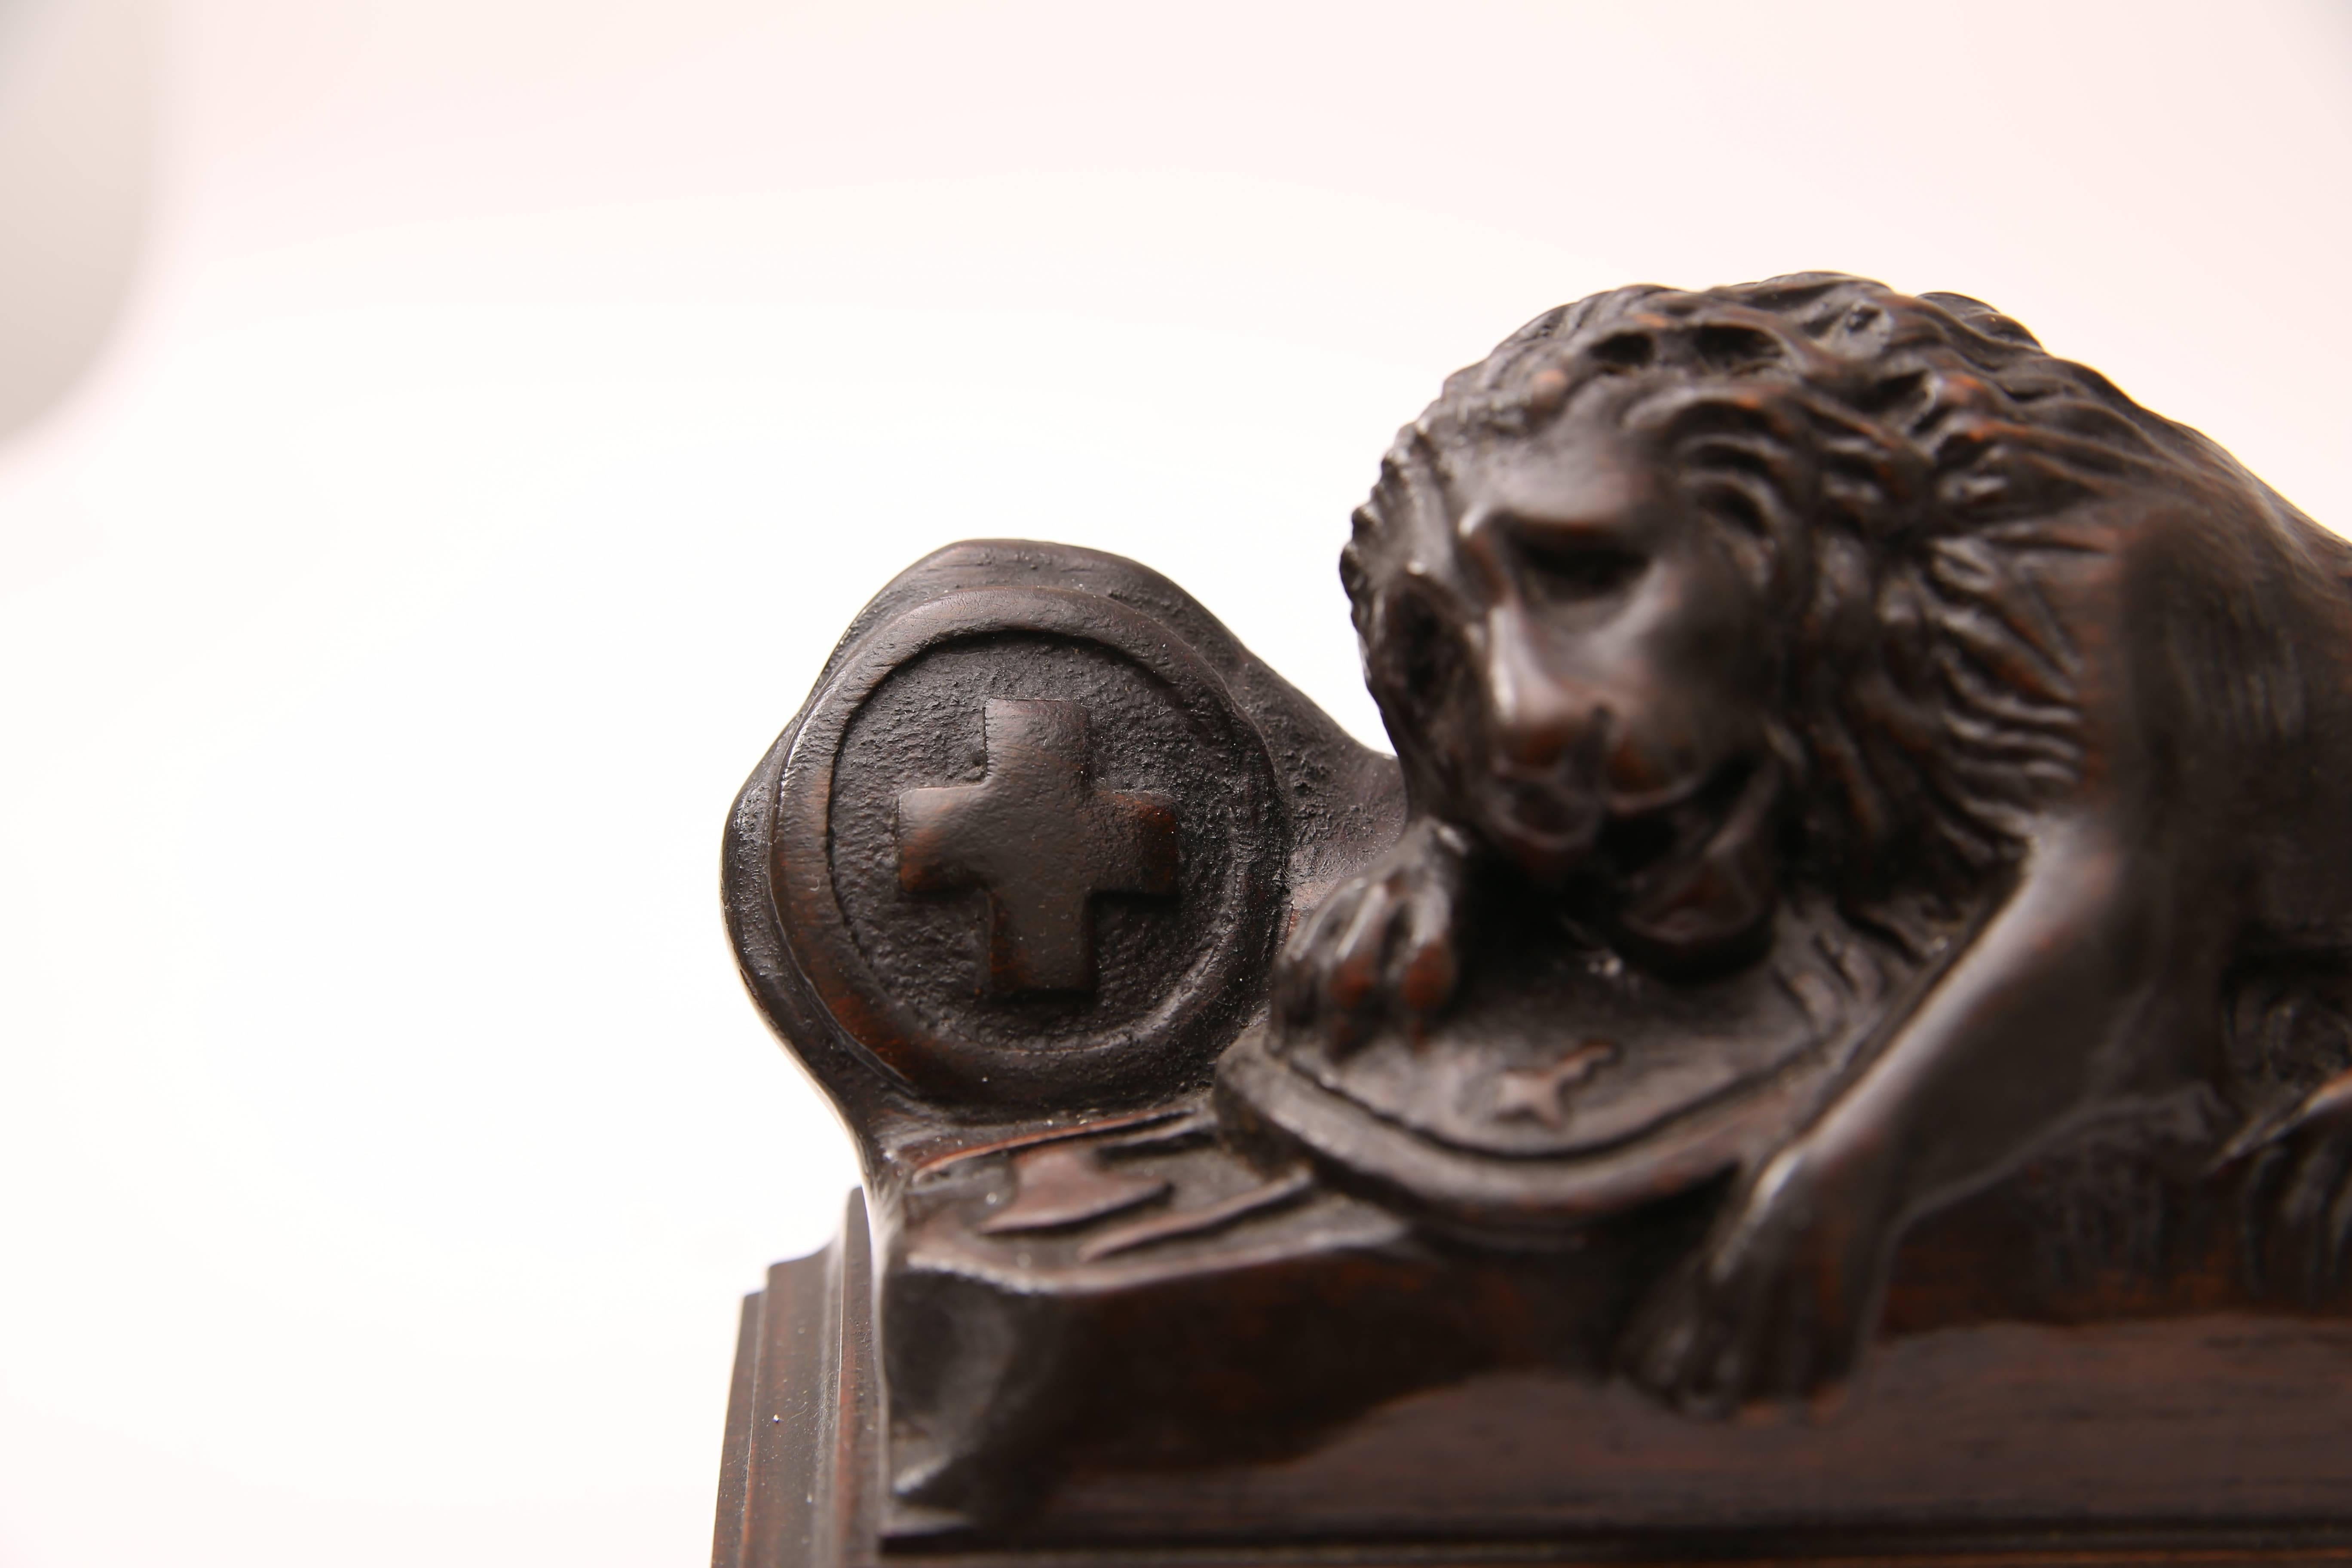 20th Century Pair of Carved Wood Book Ends Depicting the Swiss Guard Lions of Lucerne, France